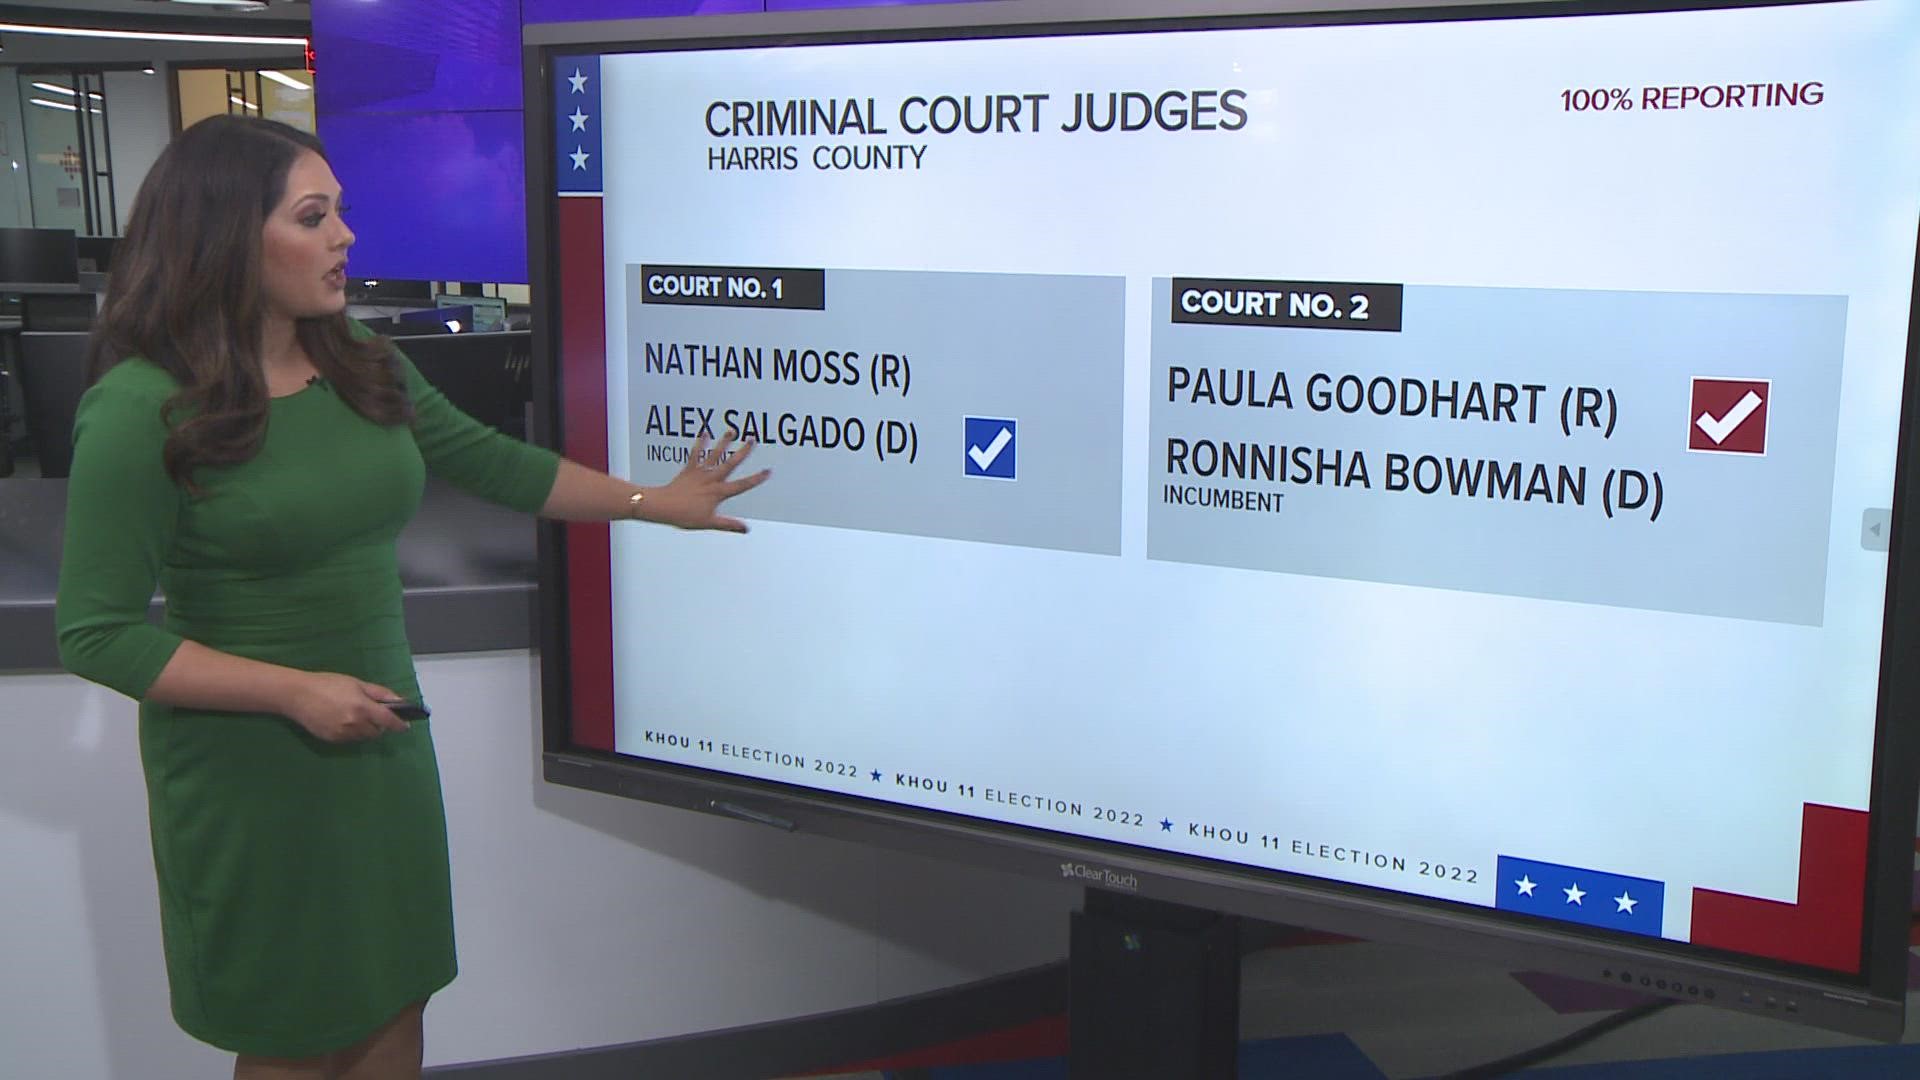 With crime and safety being top issues for Harris County voters, there was a major push by the GOP to oust Democratic criminal court judges.